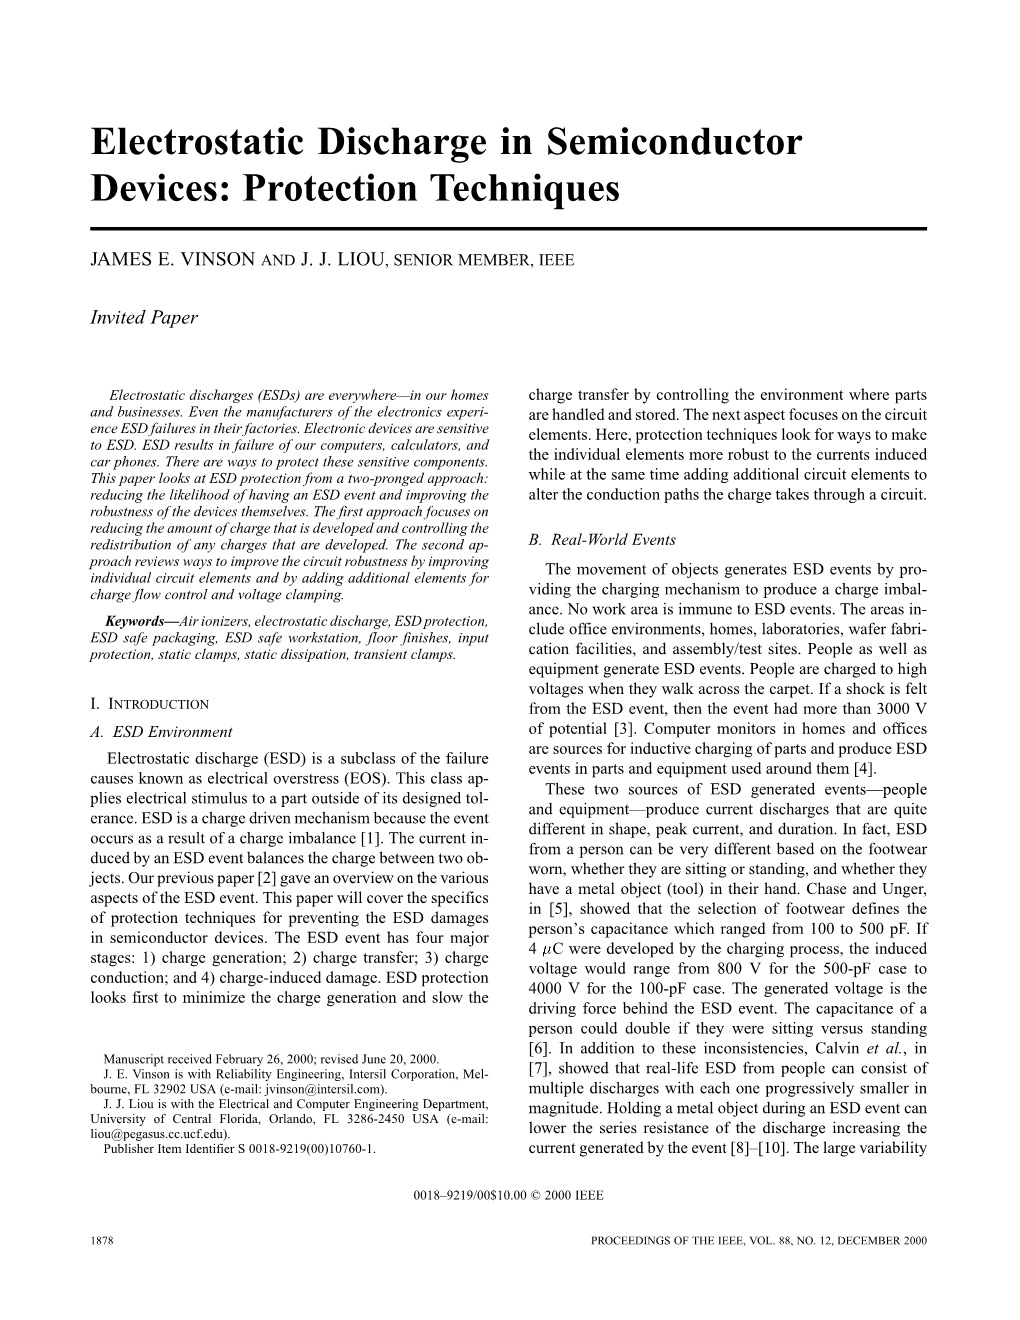 Electrostatic Discharge in Semiconductor Devices: Protection Techniques